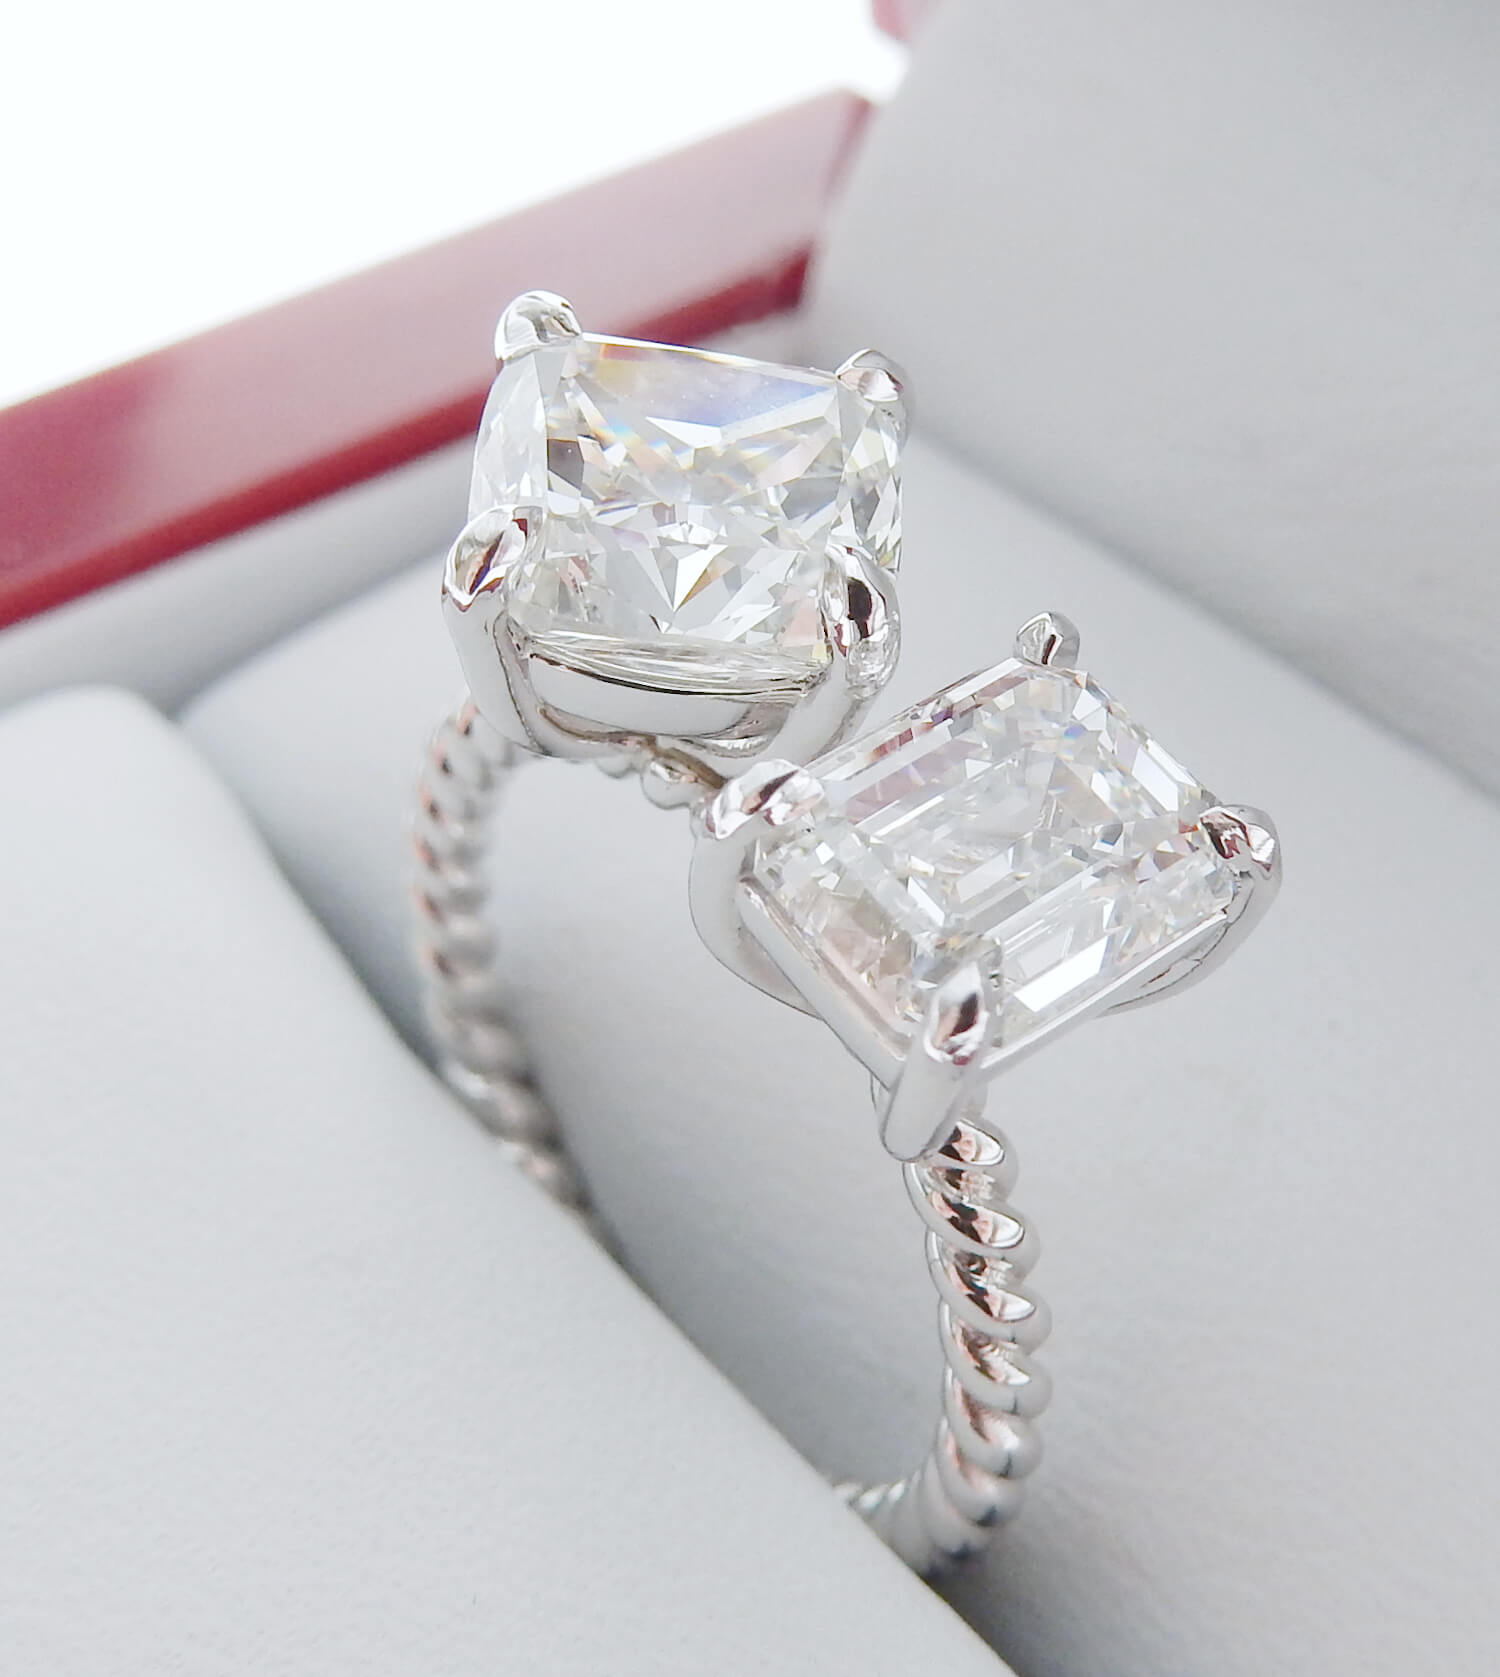 Stunning 14K Solitaire wedding set features a gorgeous 1.22CT